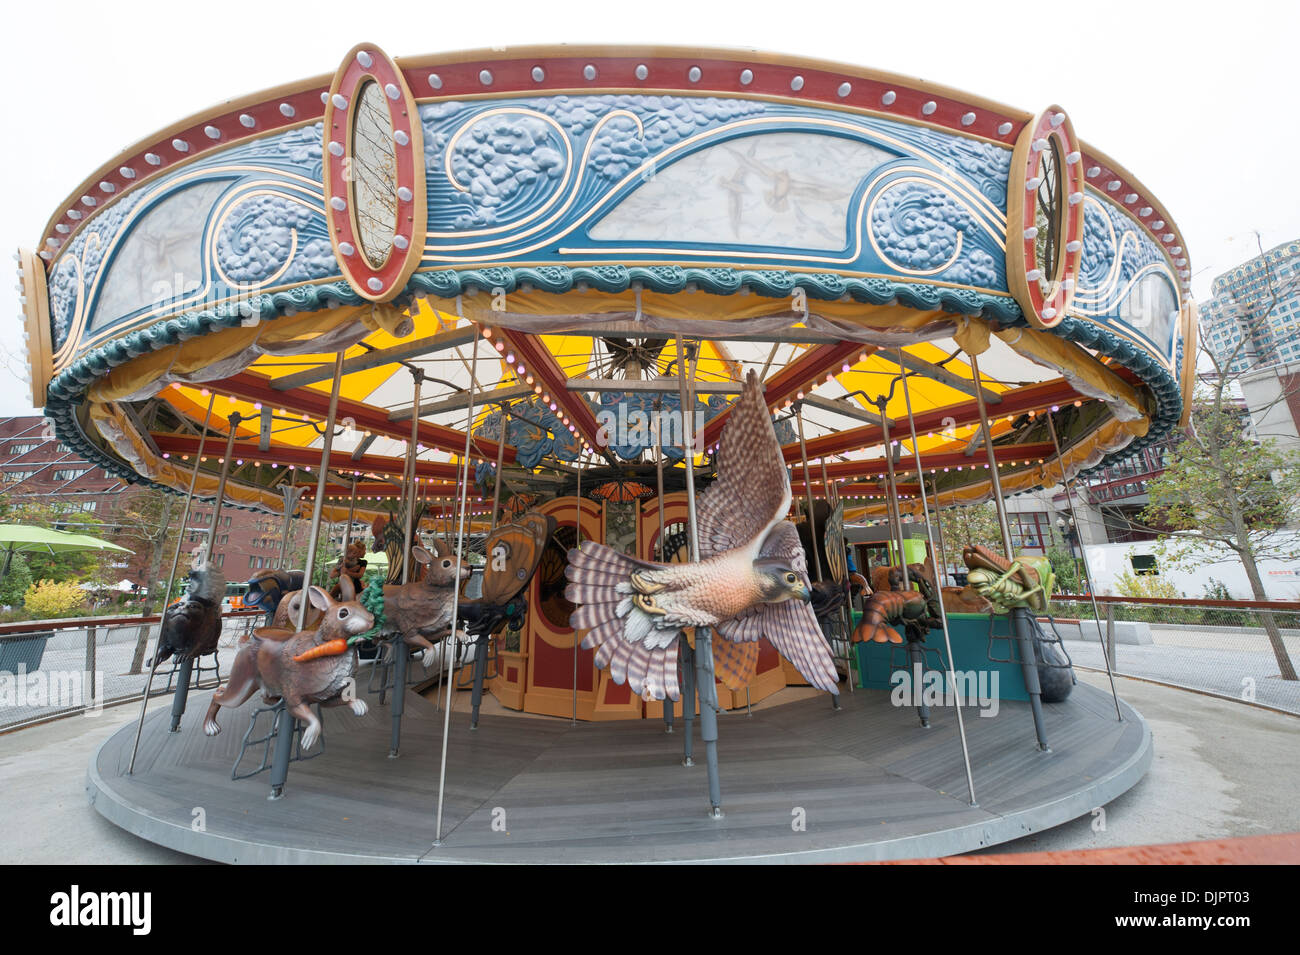 Le Greenway Carousel ouvert le Boston's Rose Kennedy Greenway le 31 août, 2013. Banque D'Images